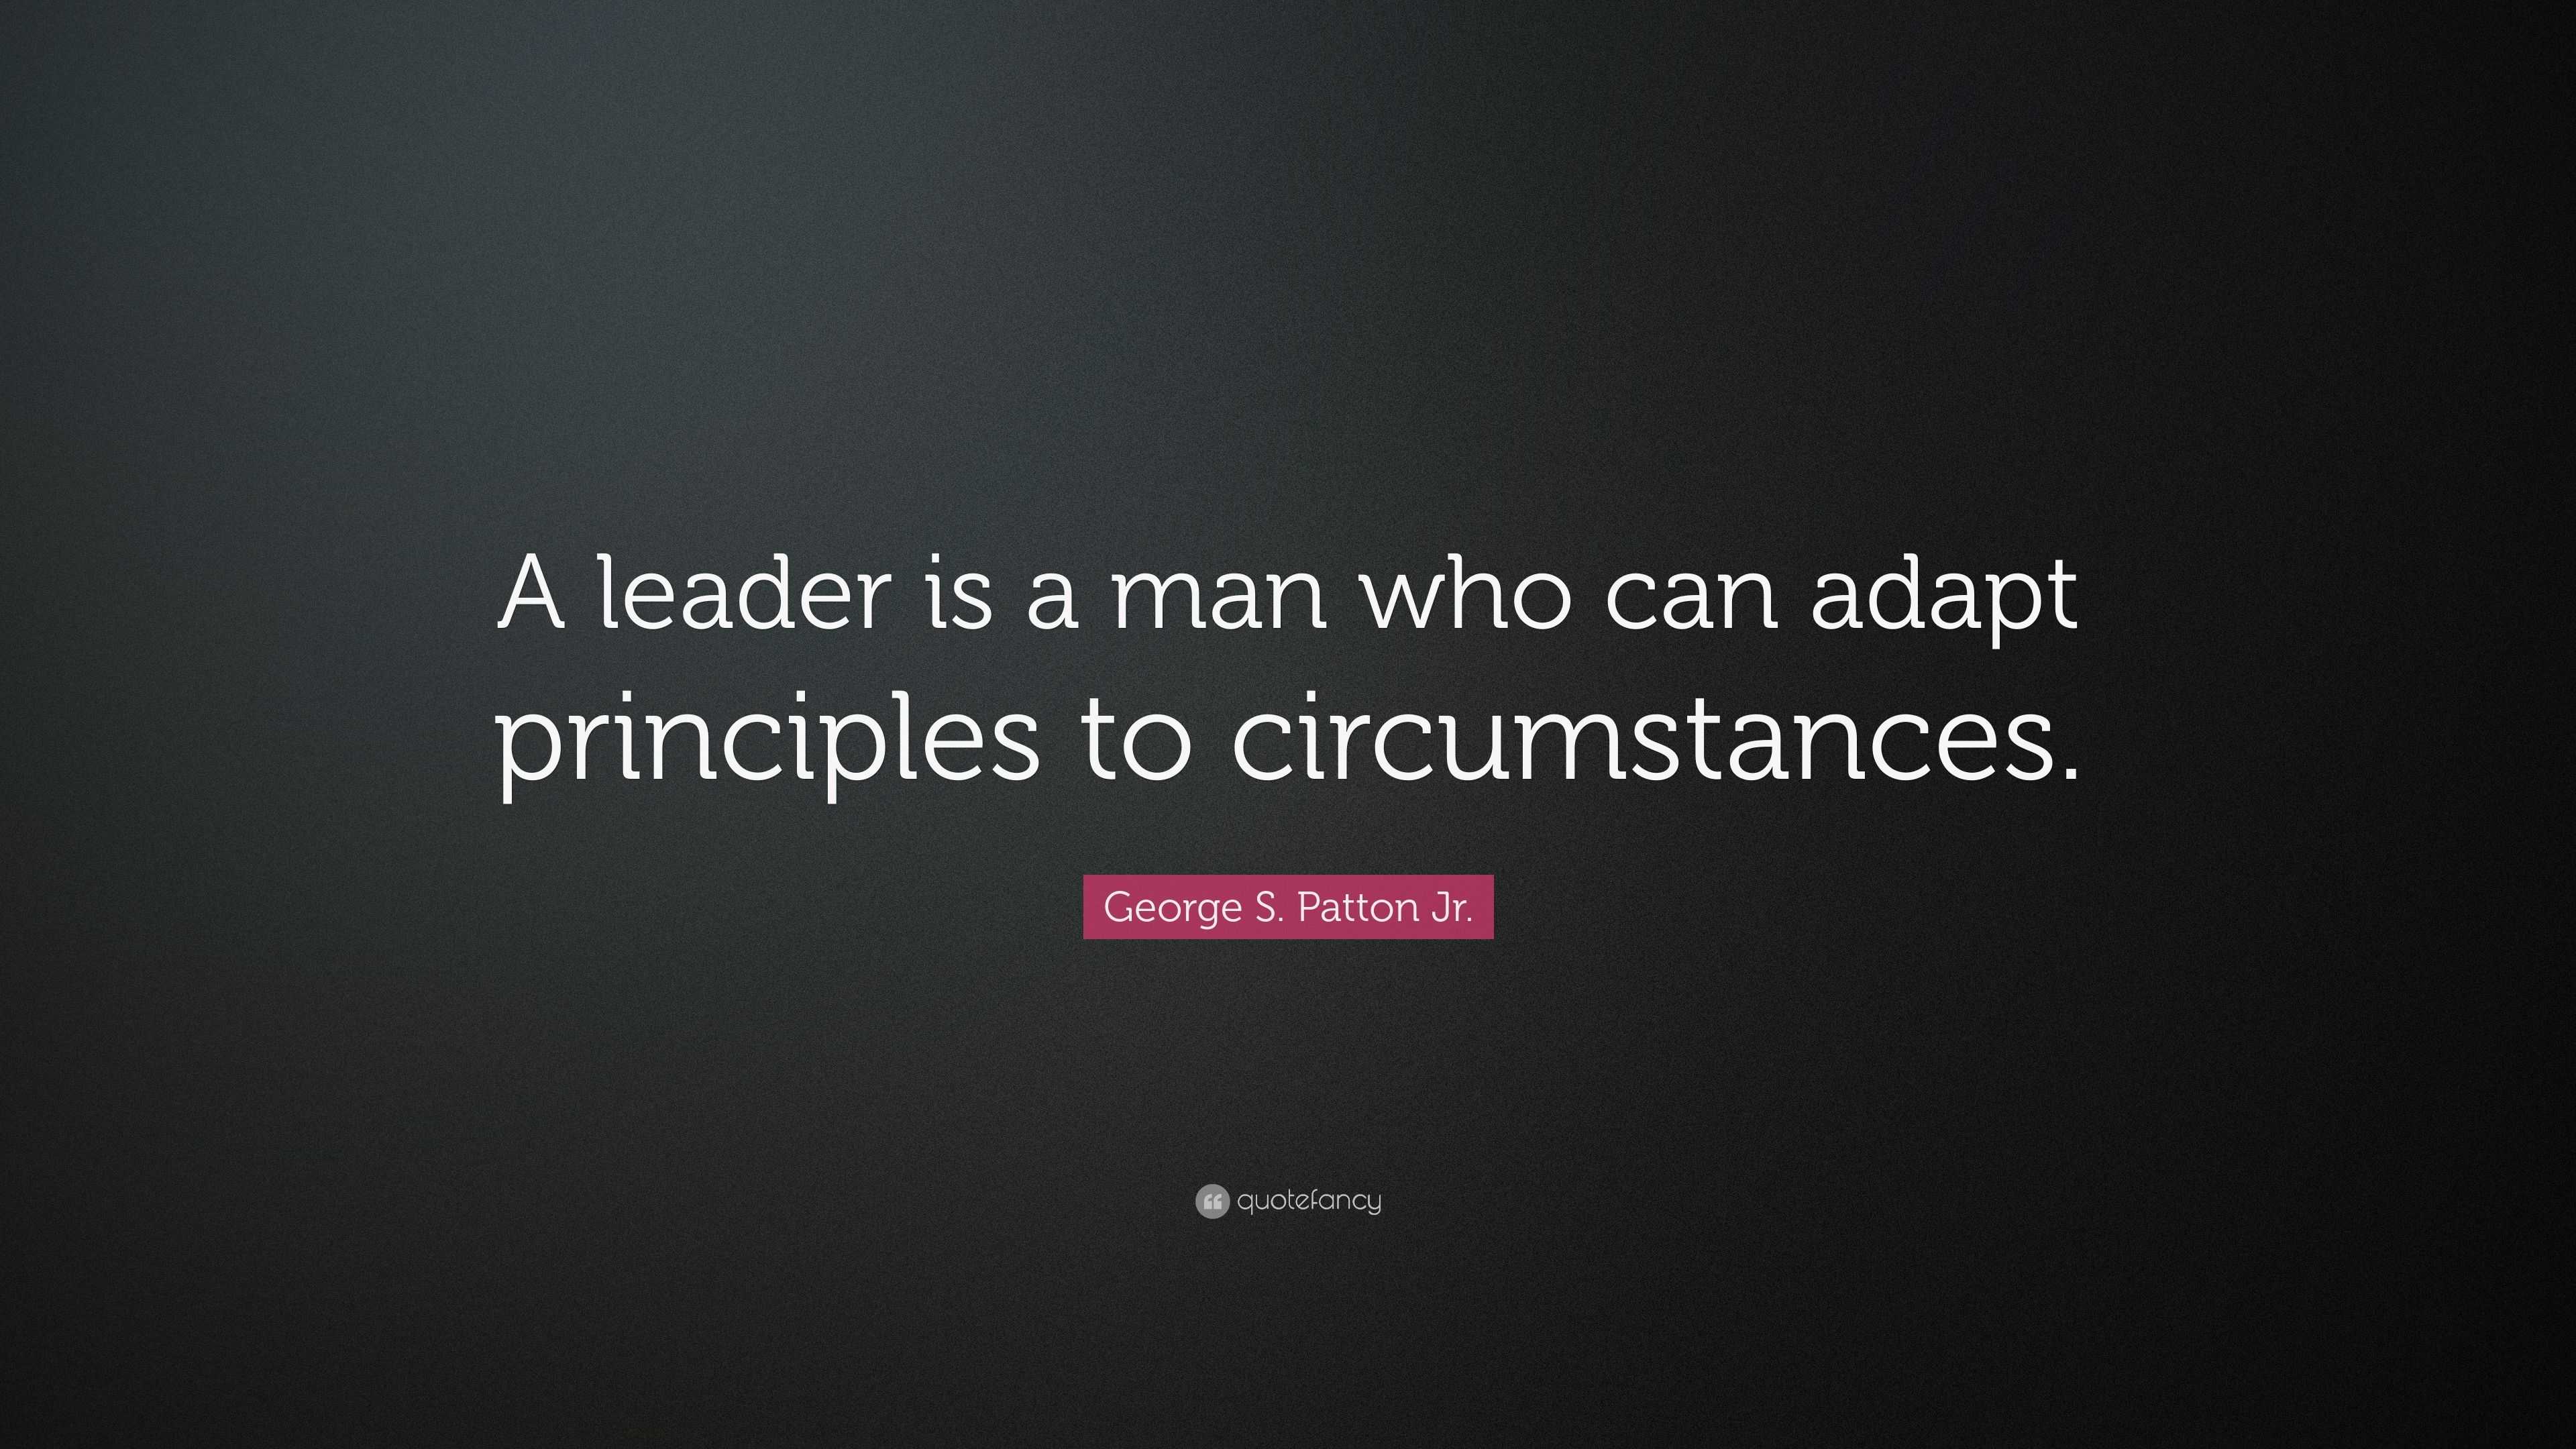 George S. Patton Jr. Quote: “A leader is a man who can adapt principles ...